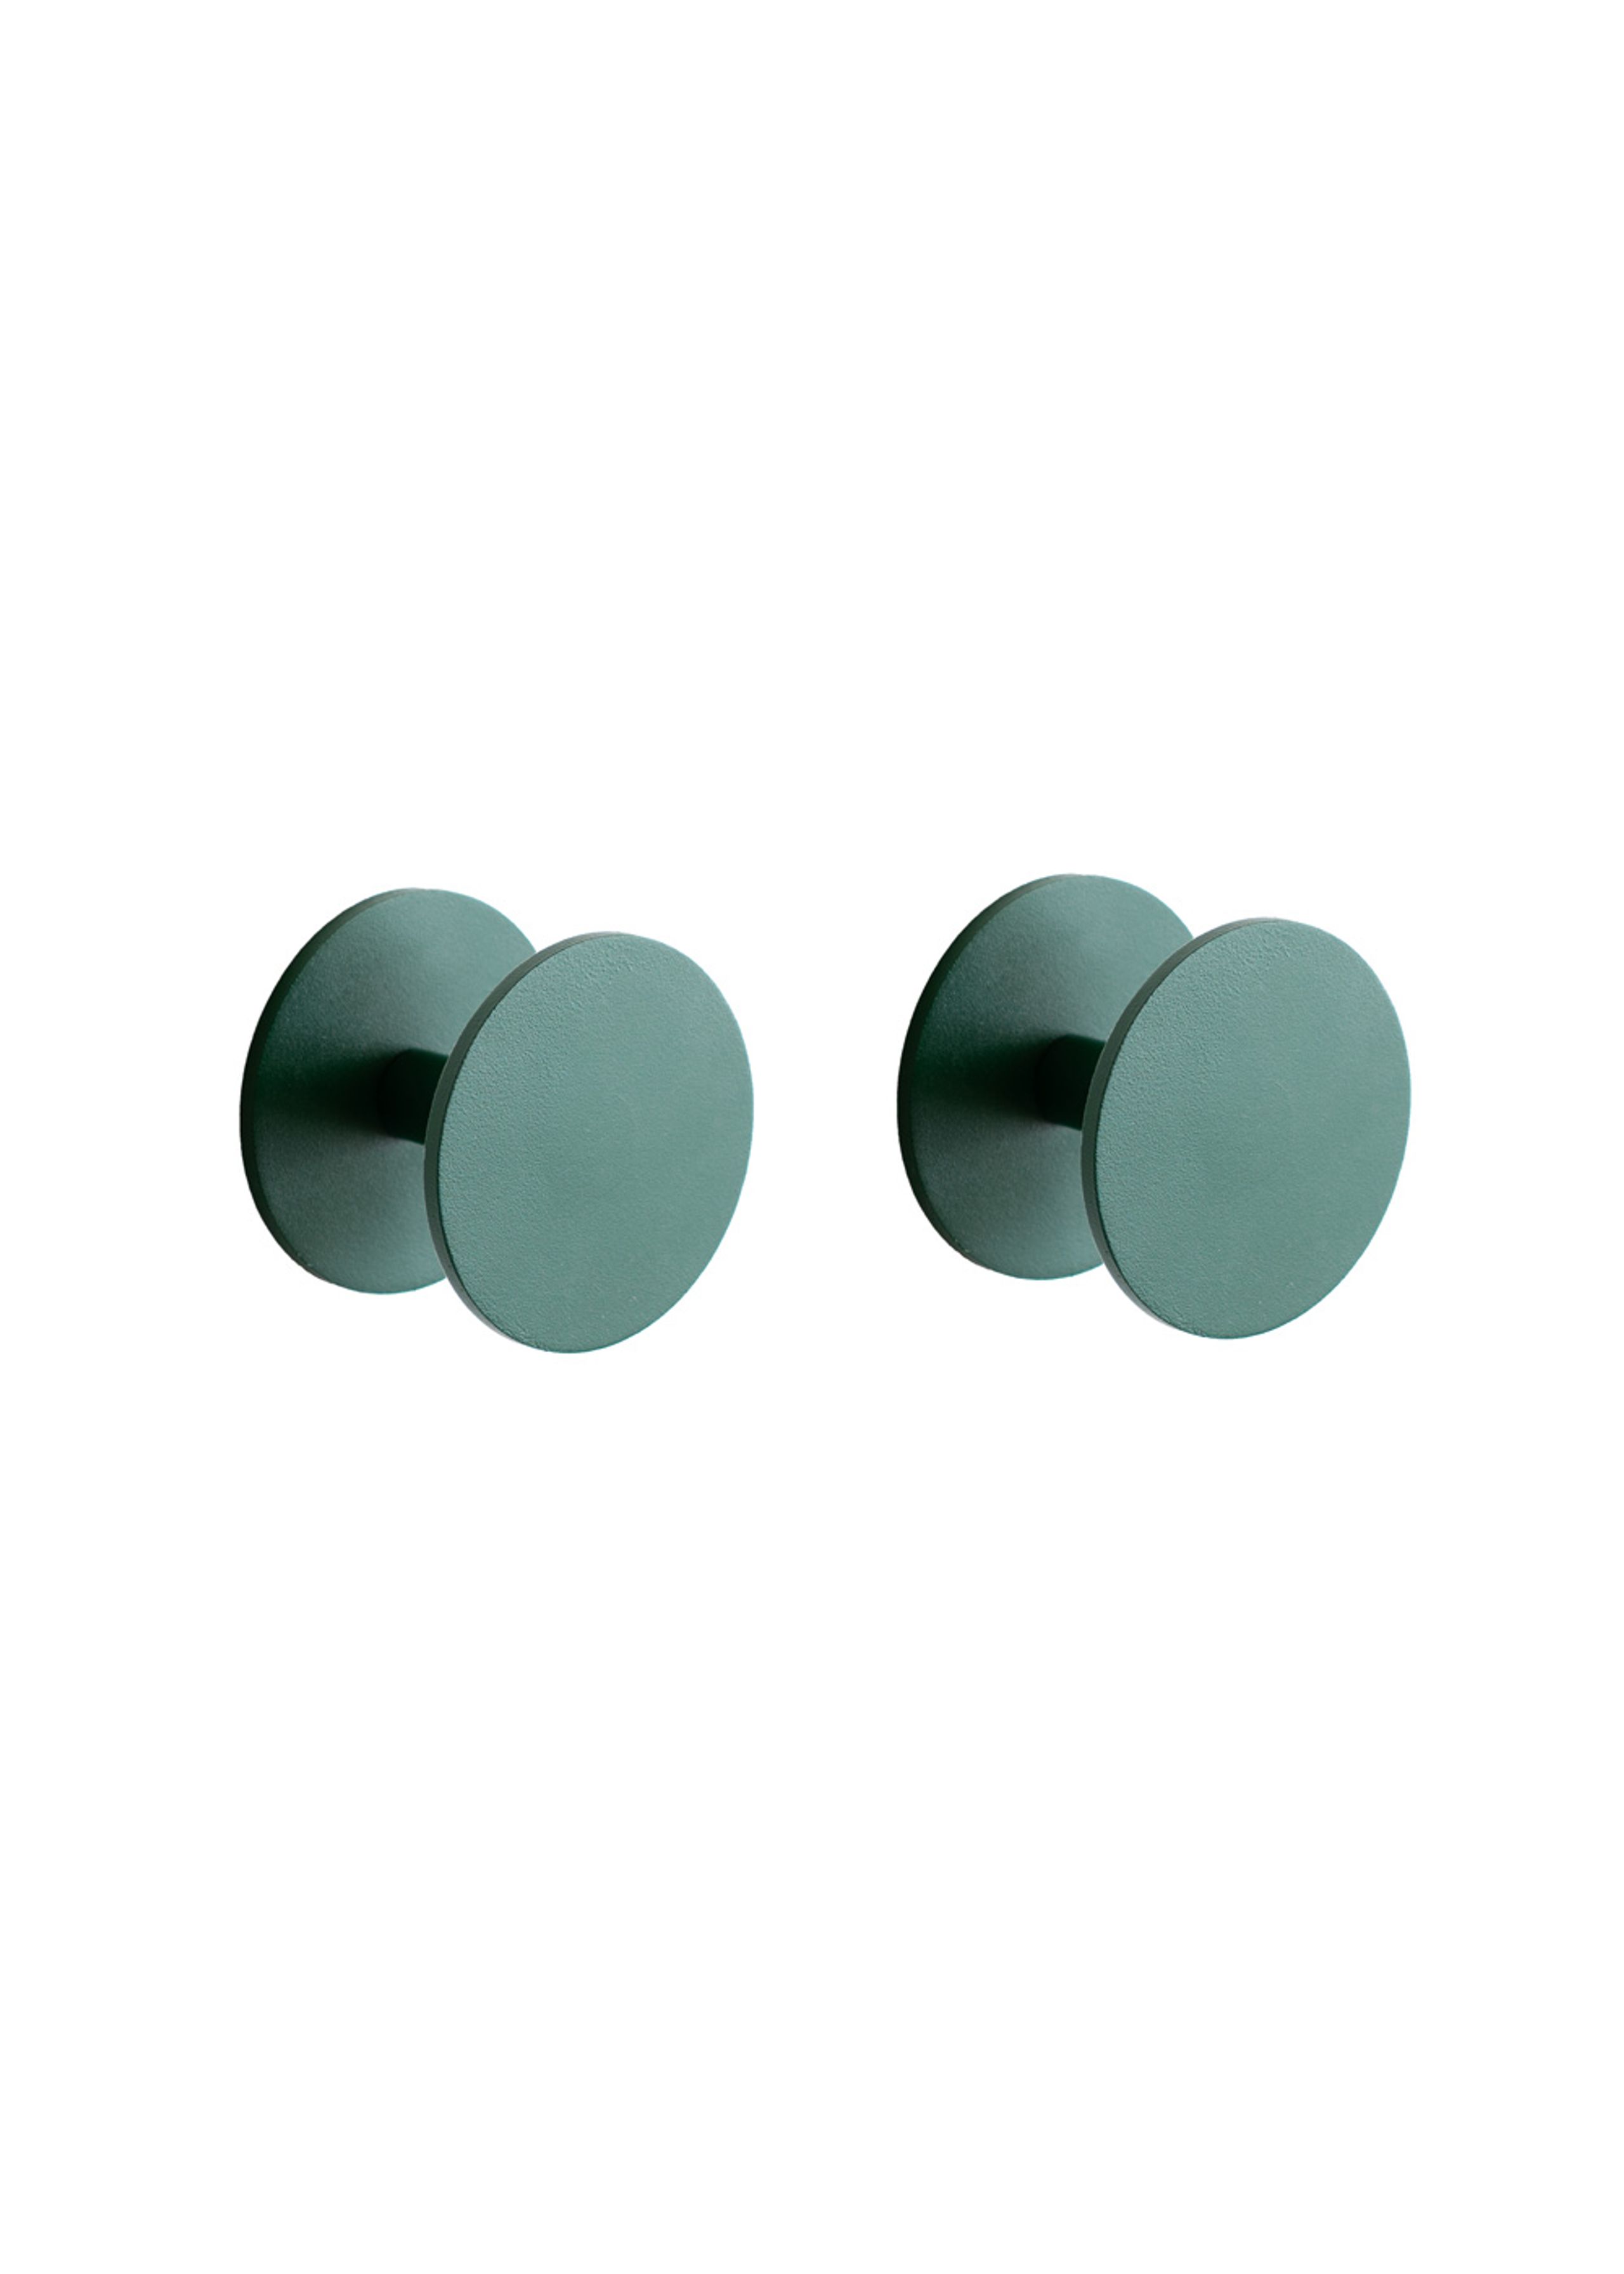 raawii - Cintres - Pipeline Hook / Set of 2 - Moss Green